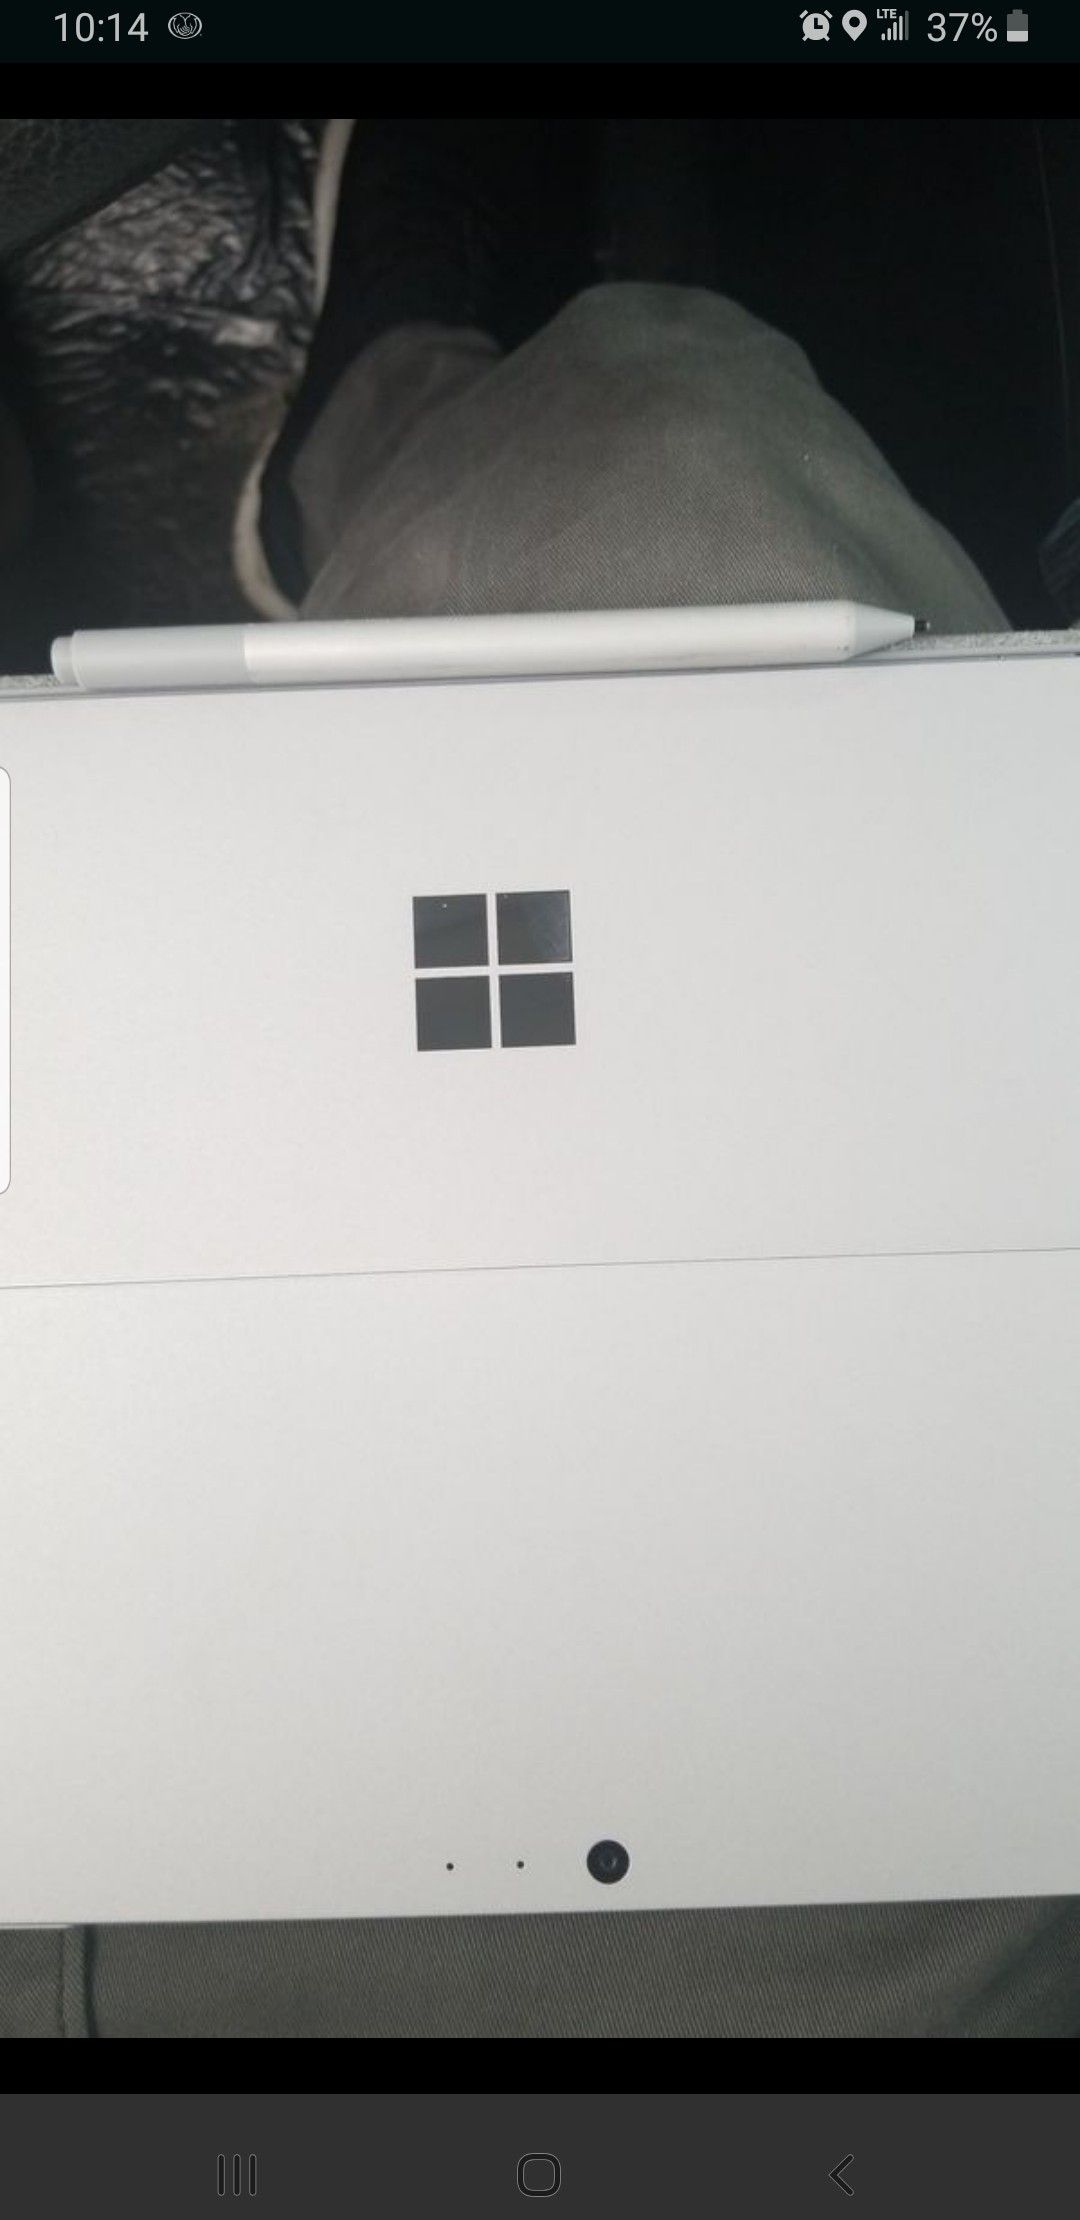 Microsoft surface pro 6 like new with keyboard and pen